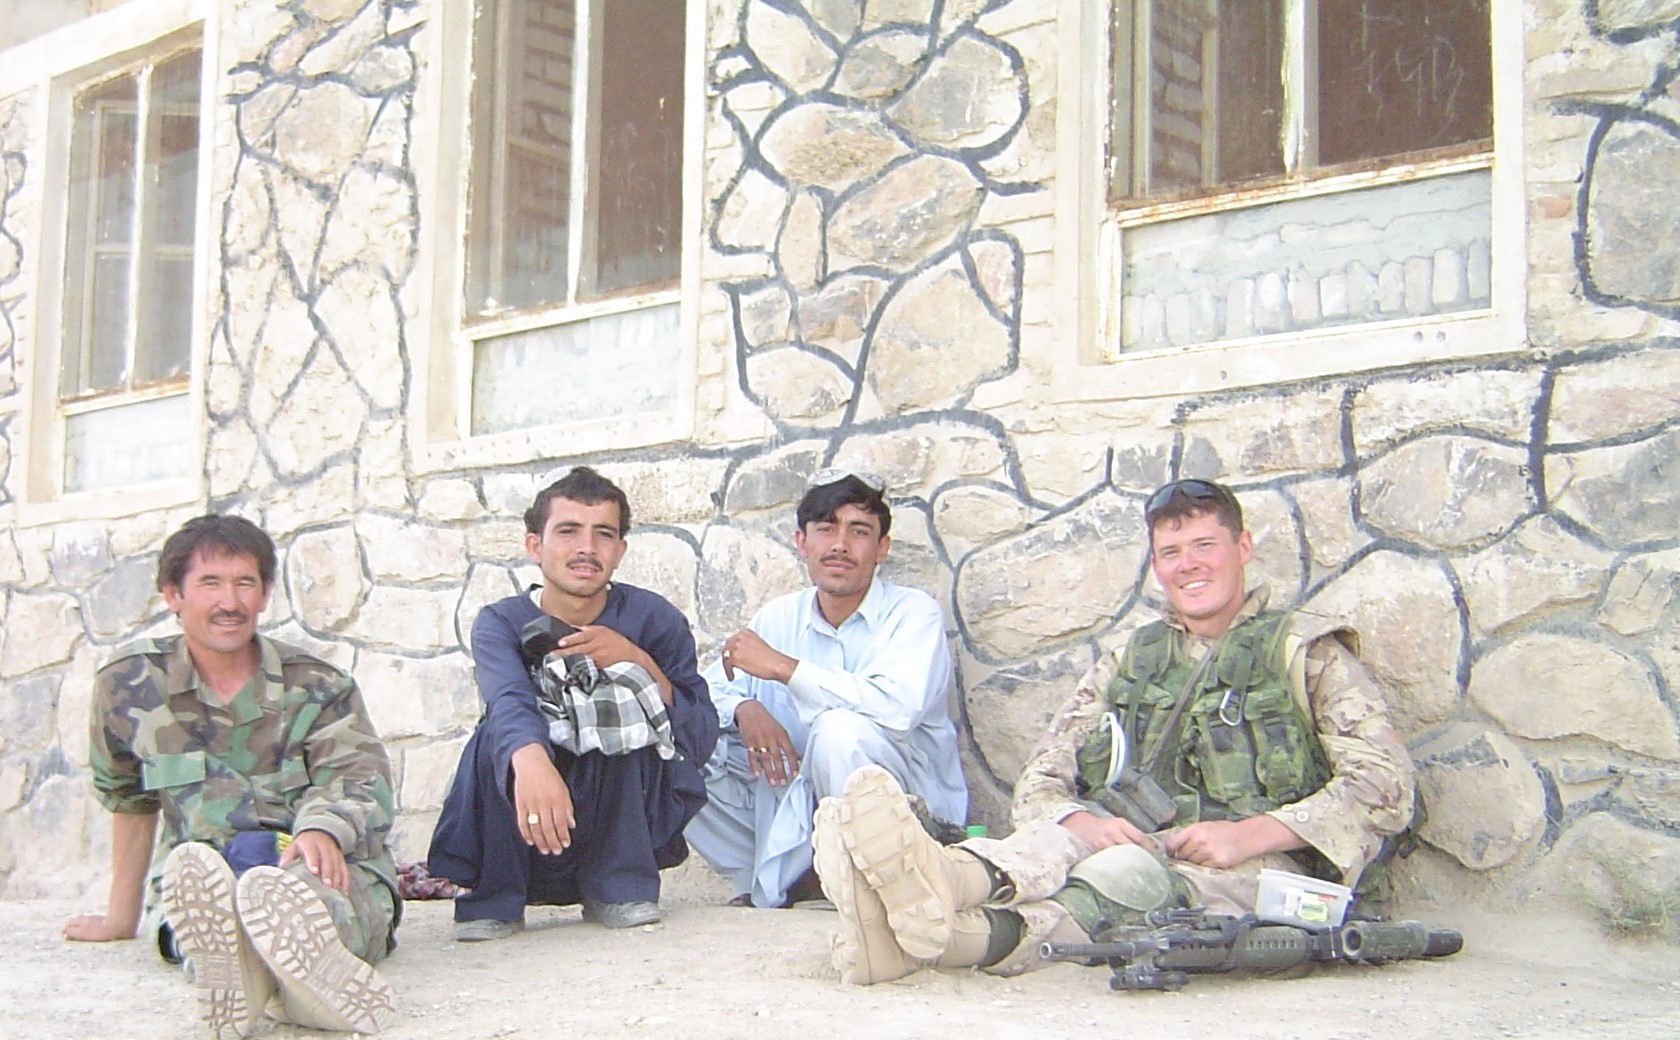 Robin Rickard dressed in combat gear sits outside a building in Afghanistan with three other men.